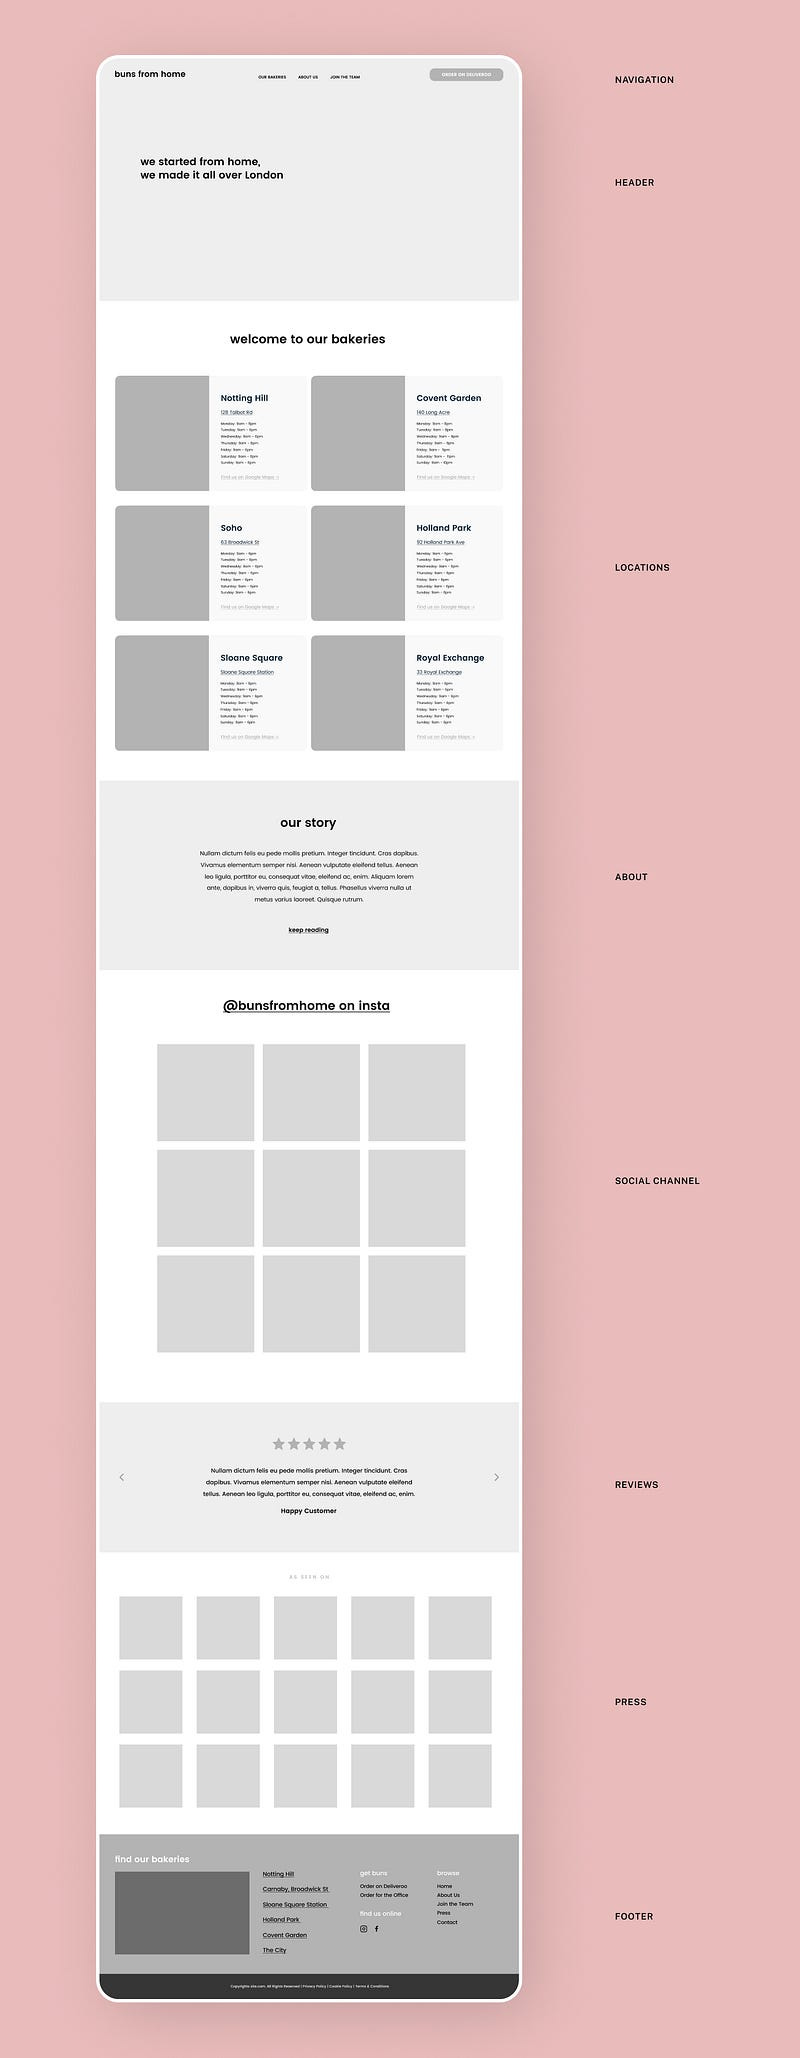 UI/UX Case Study: London Bakery Website Redesign — buns from home Website Wireframe